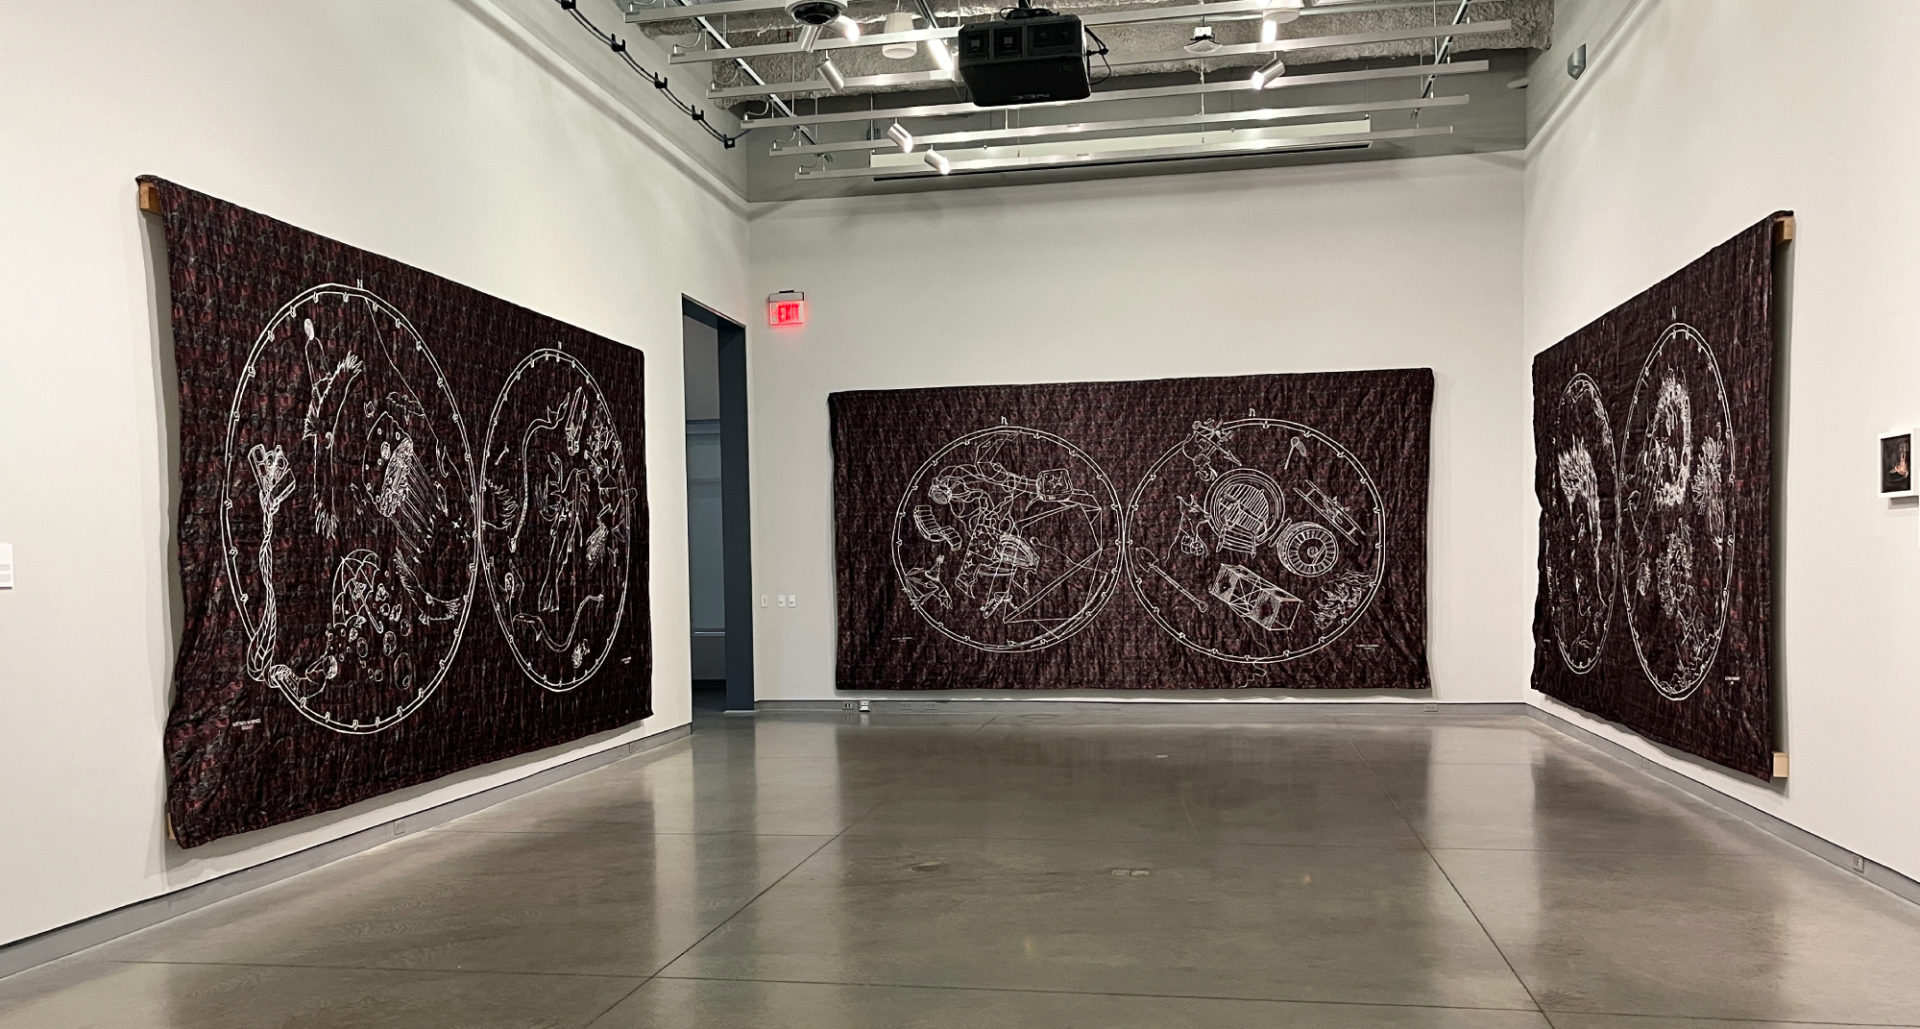 Three huge purple-ish tapestries with white embroidery on them are on three walls in a gallery. Each tapestry contains two circles with imagery inside; they resemble star maps.